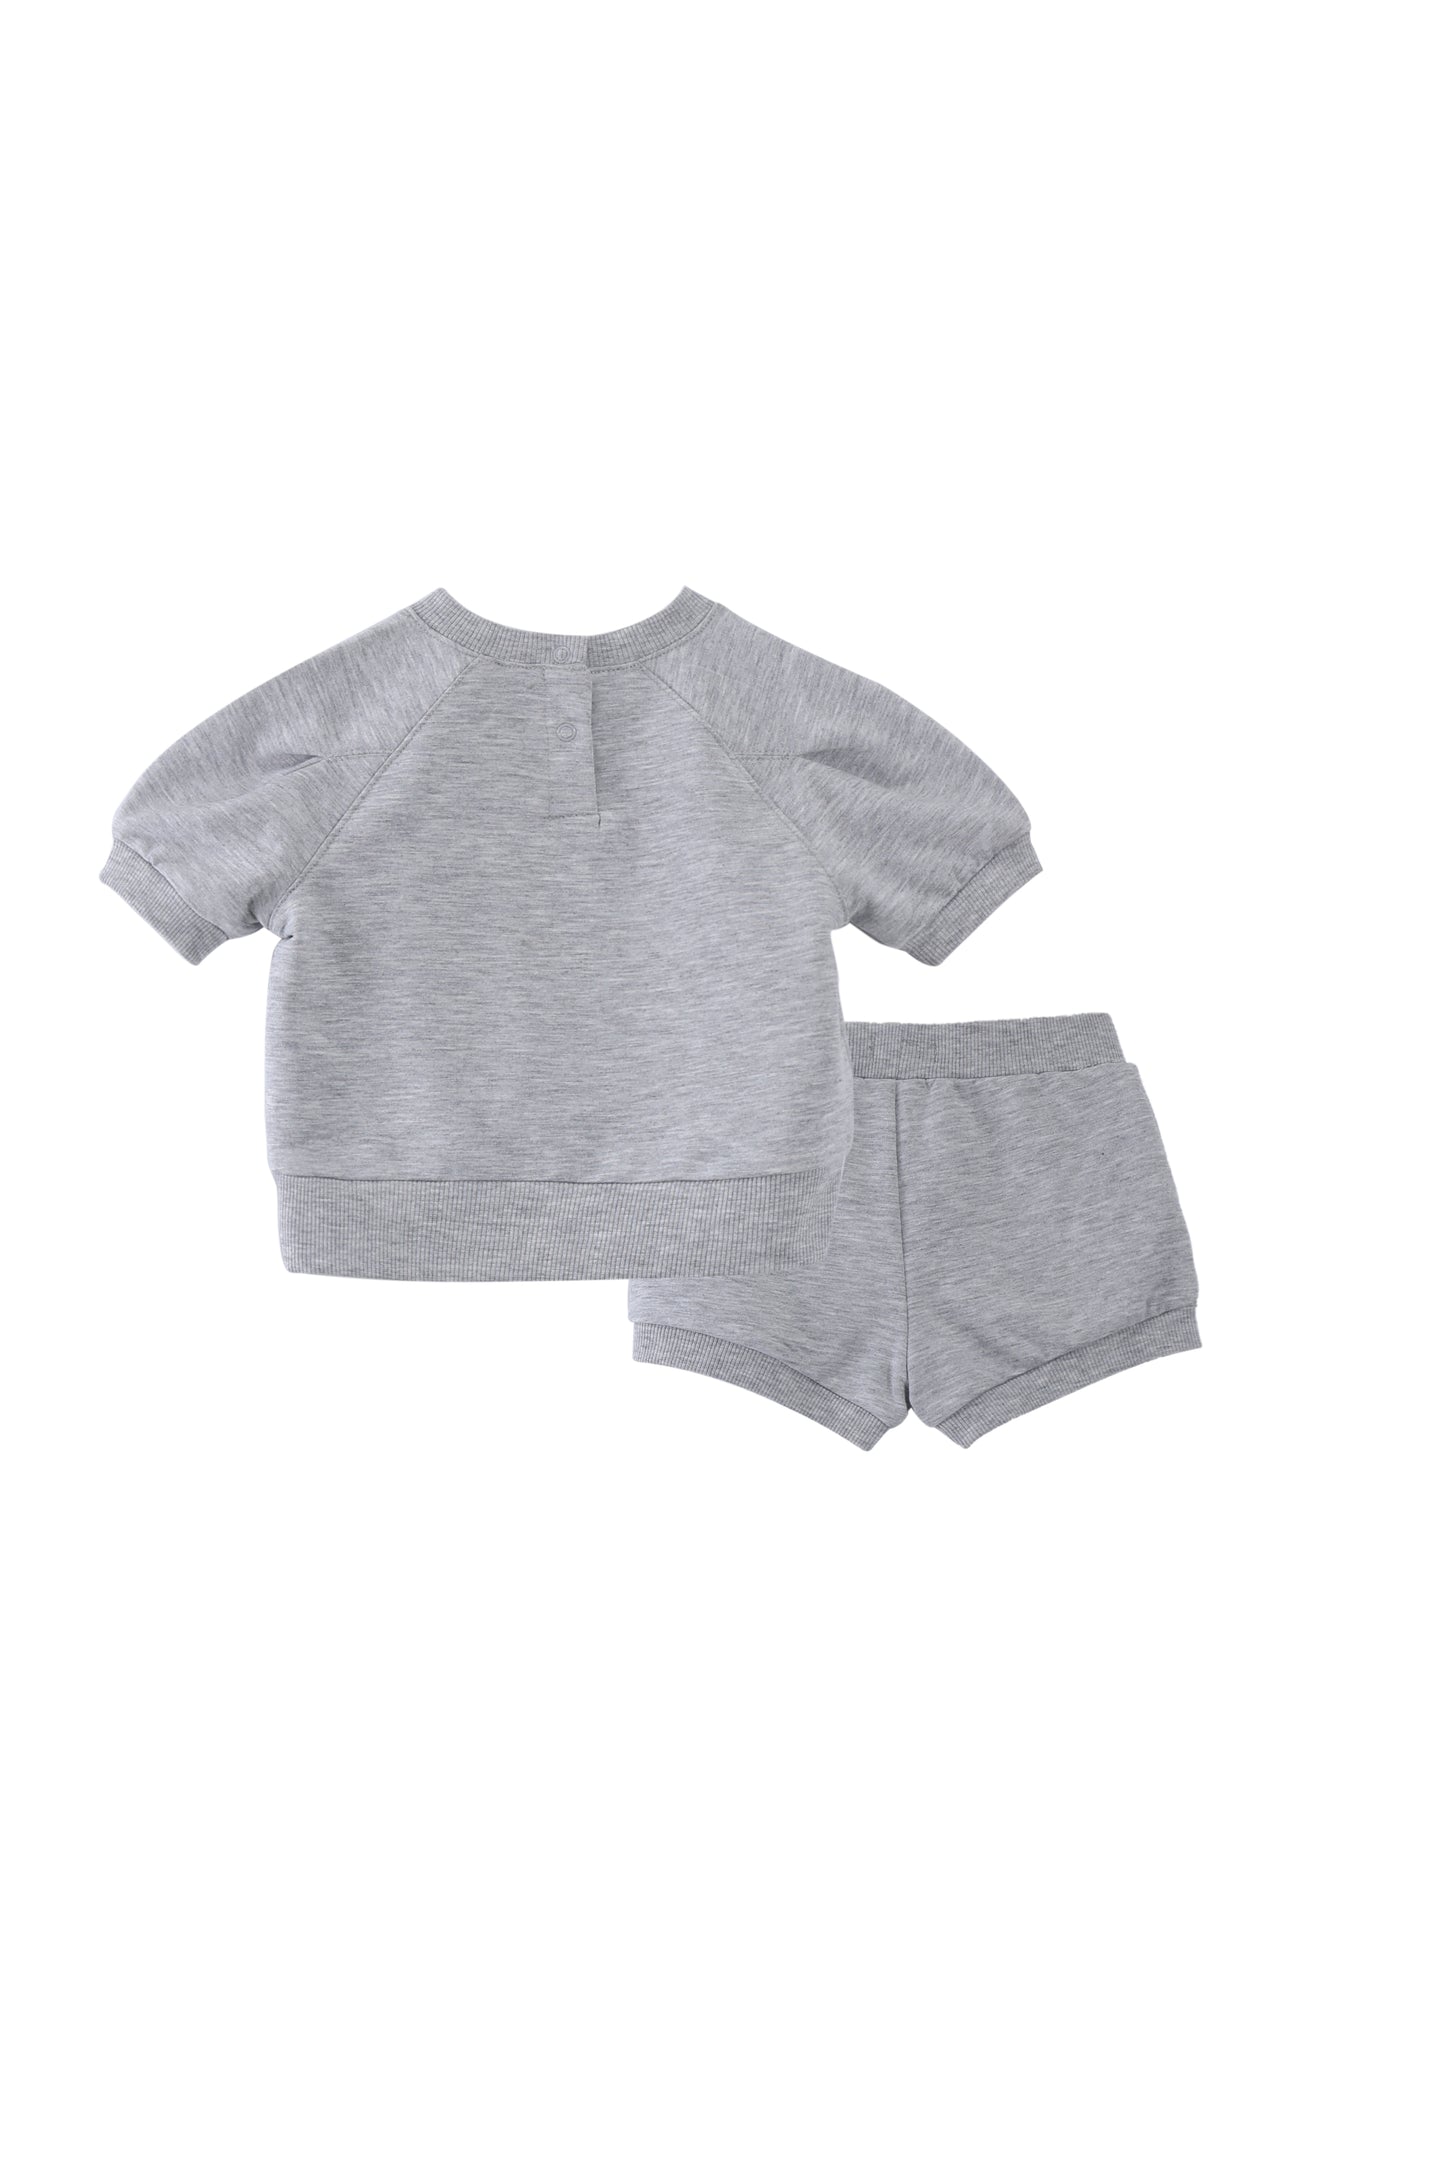 BACK OF LIGHT GREY FRENCH TERRY SWEATSHIRT TOP AND SWEAT SHORTS WITH A BOW